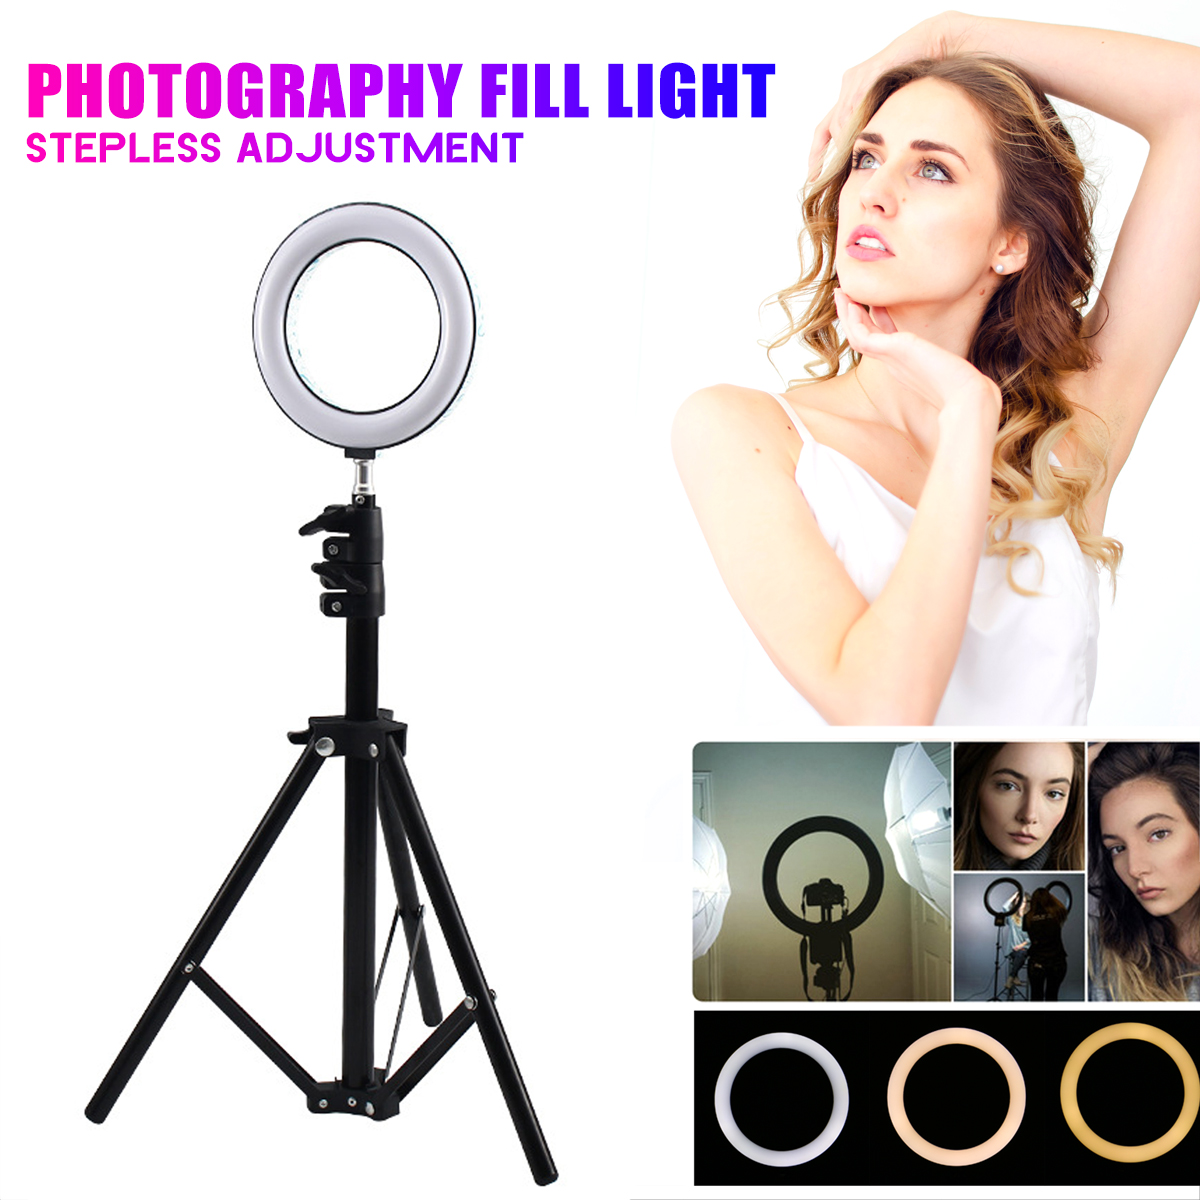 6-inch-LED-Ring-Light-Fill-Light-For-Makeup-Streaming-Selfie-Beauty-Photography-B-Makeup-Mirror-Ligh-1635732-3